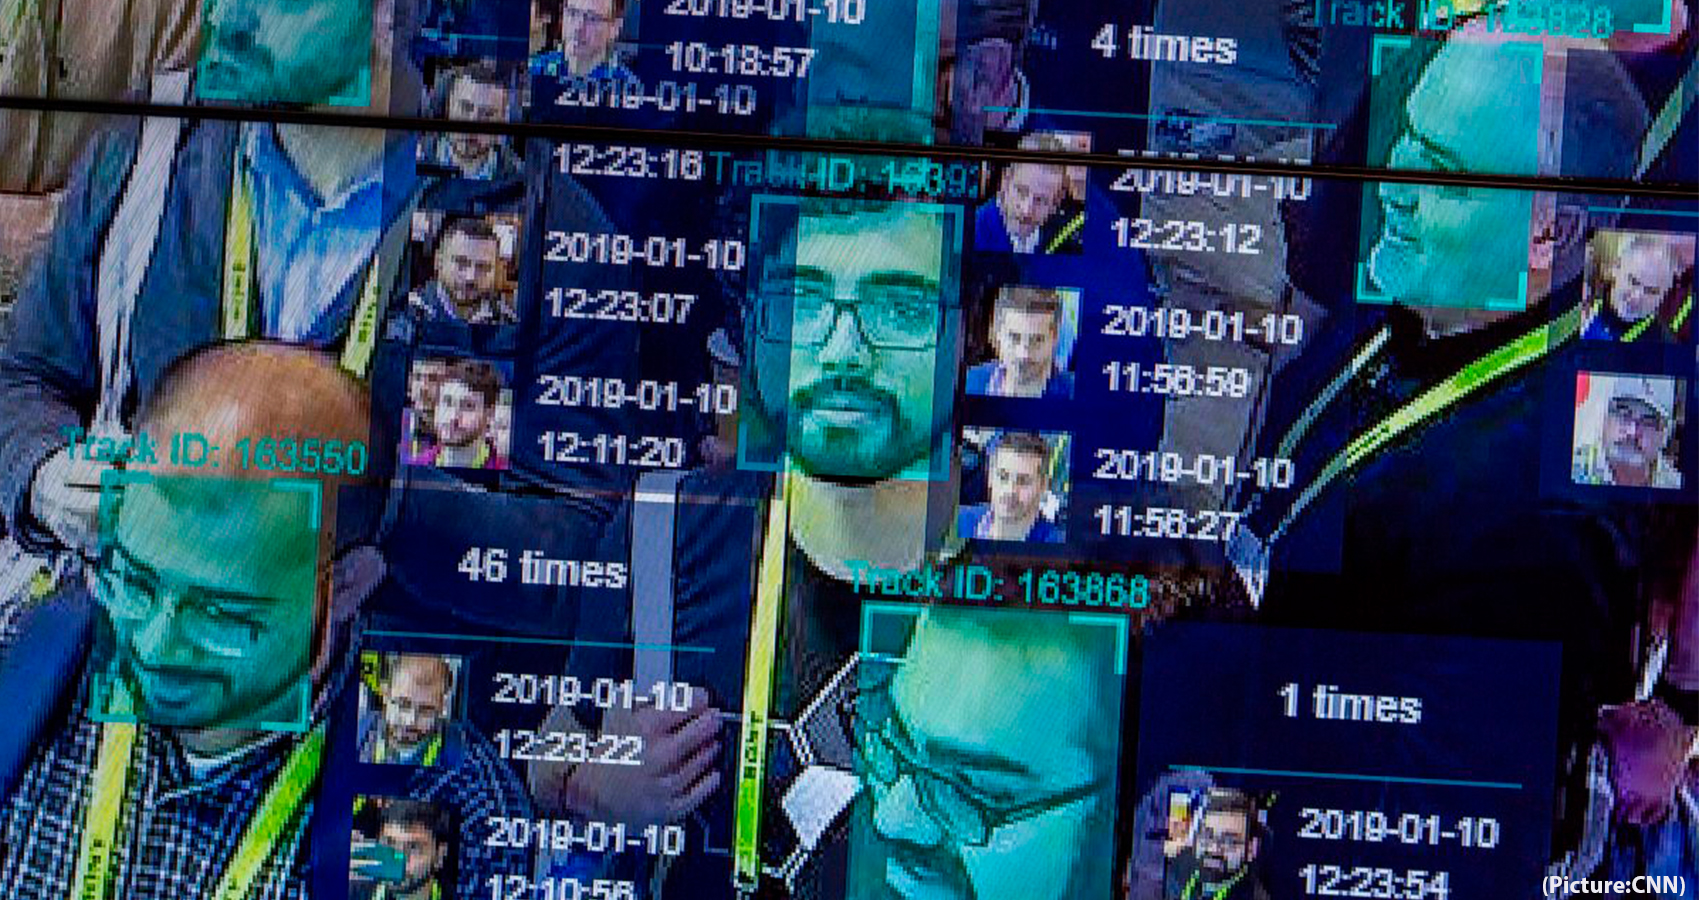 Facial Recognition Expanded In India While Concerns Over Lack Of Law Protecting Data Grows